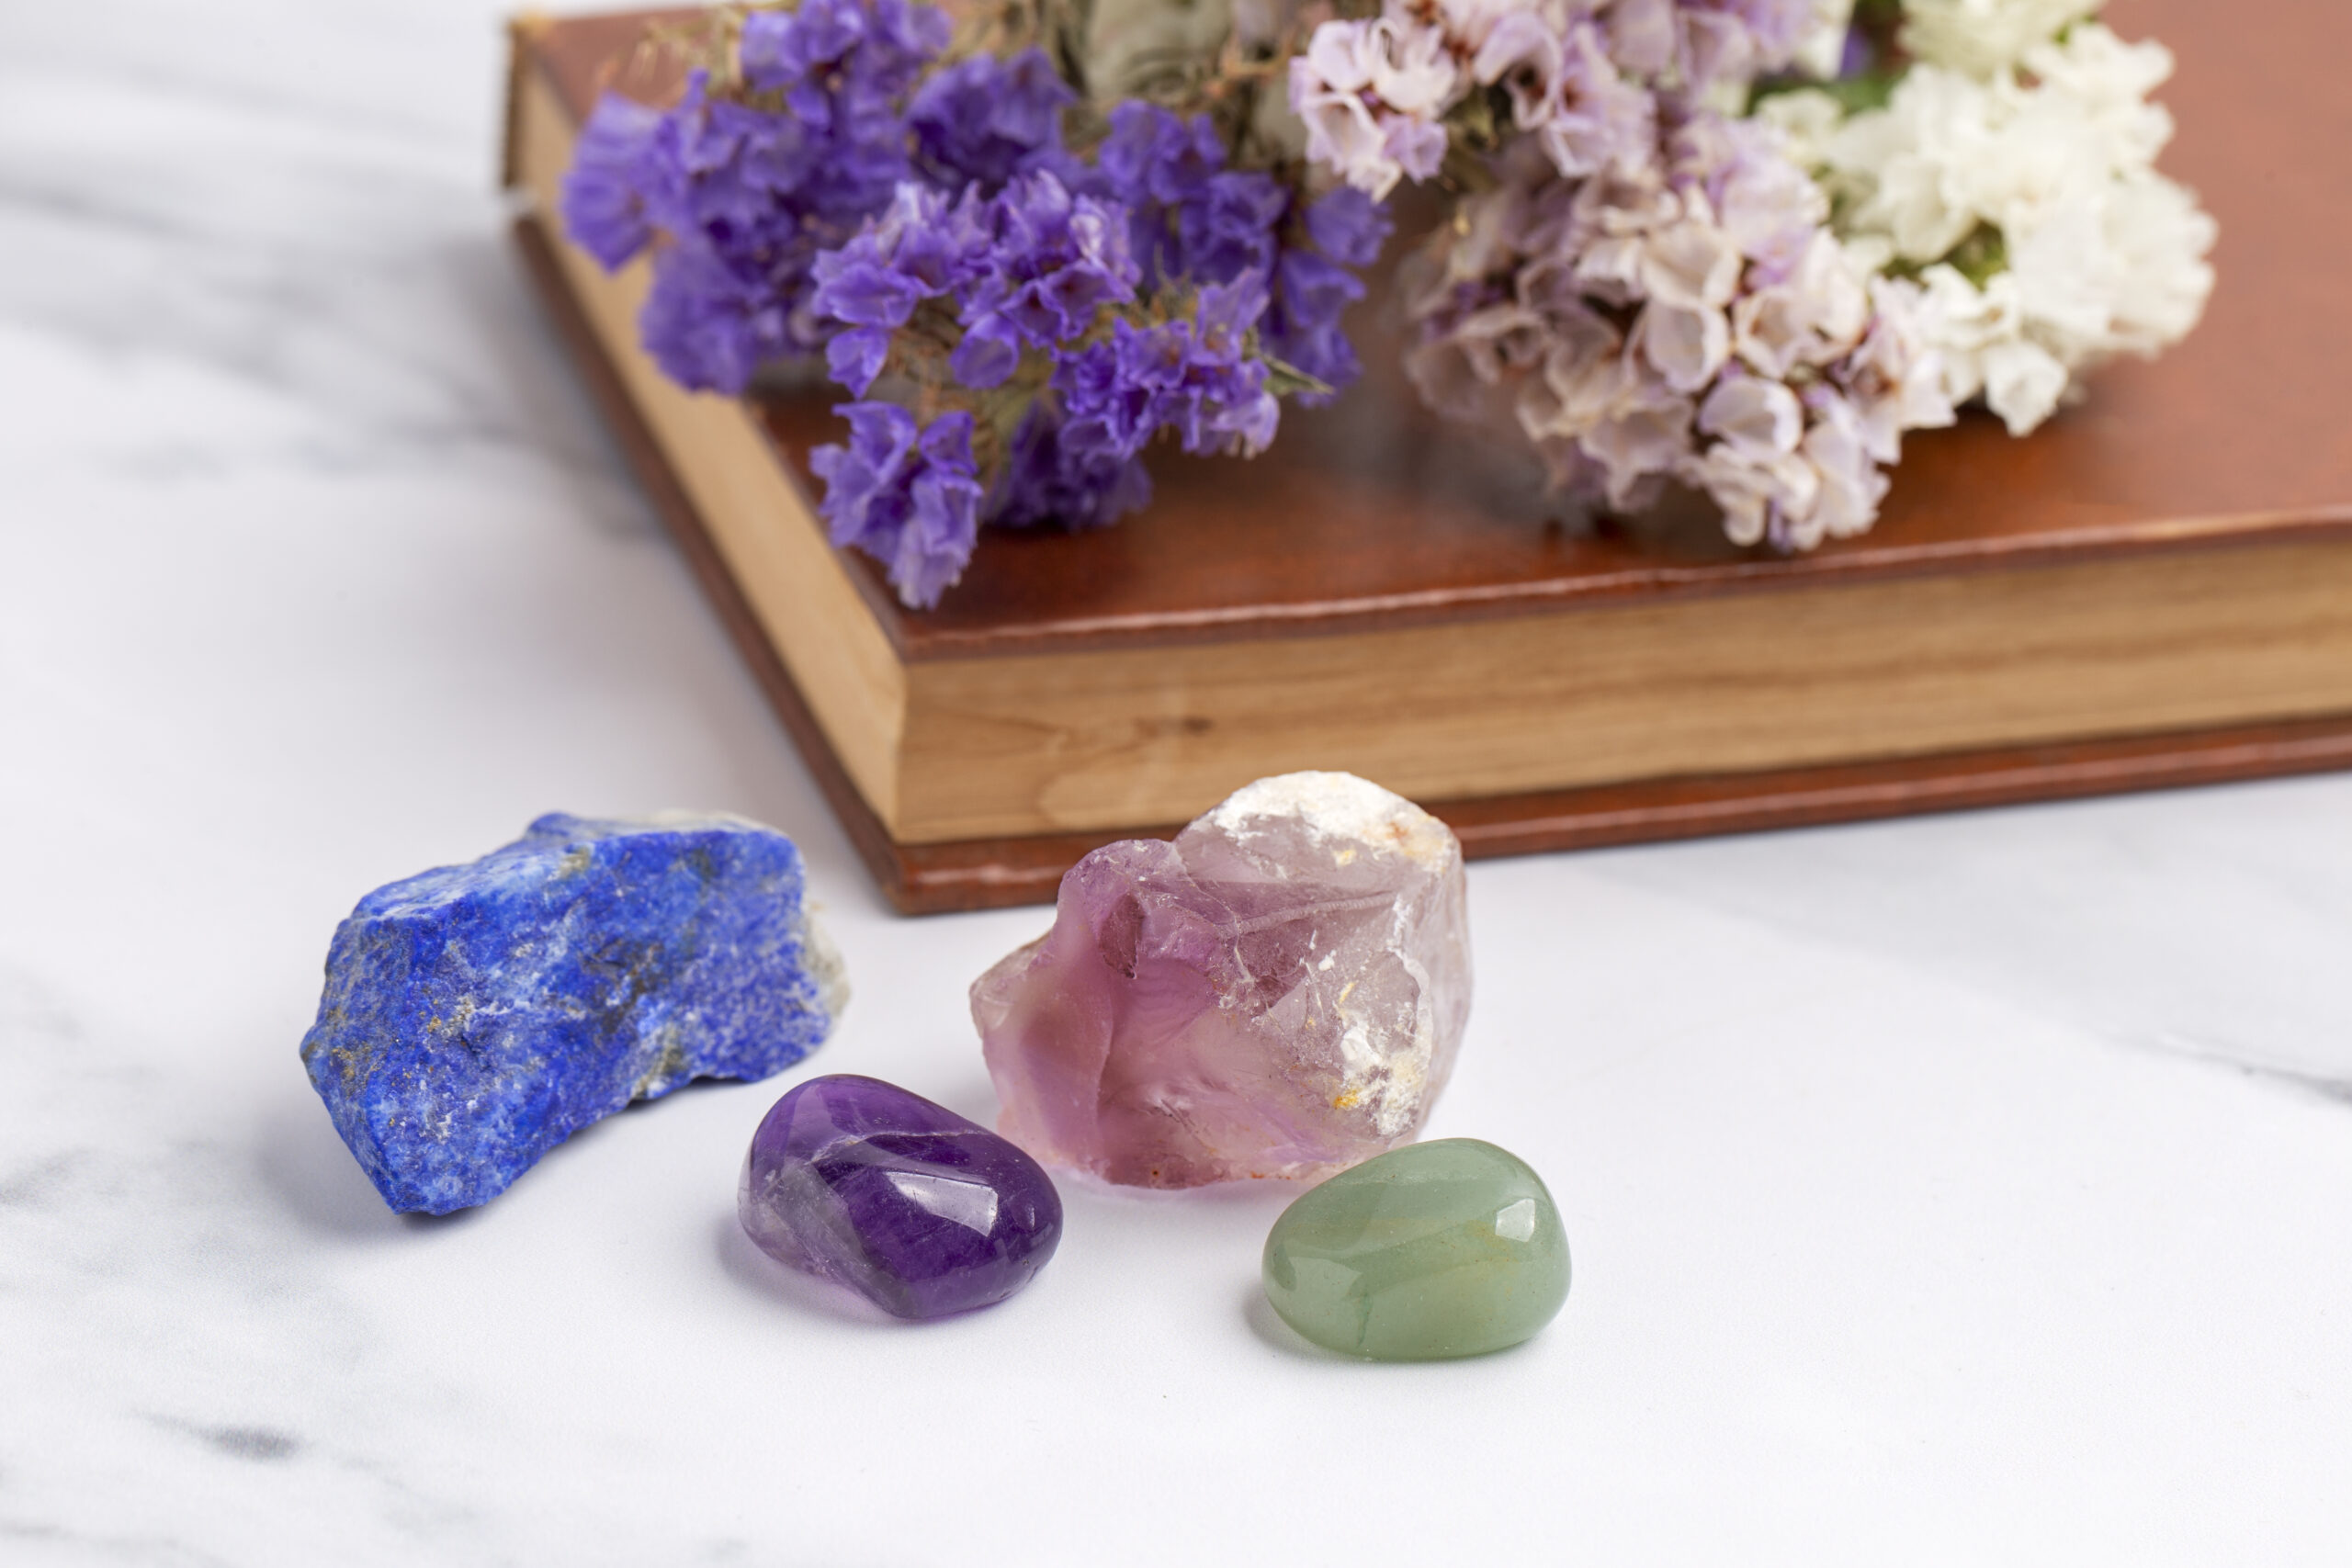 “The best crystals for your zodiac sign and how to use them”